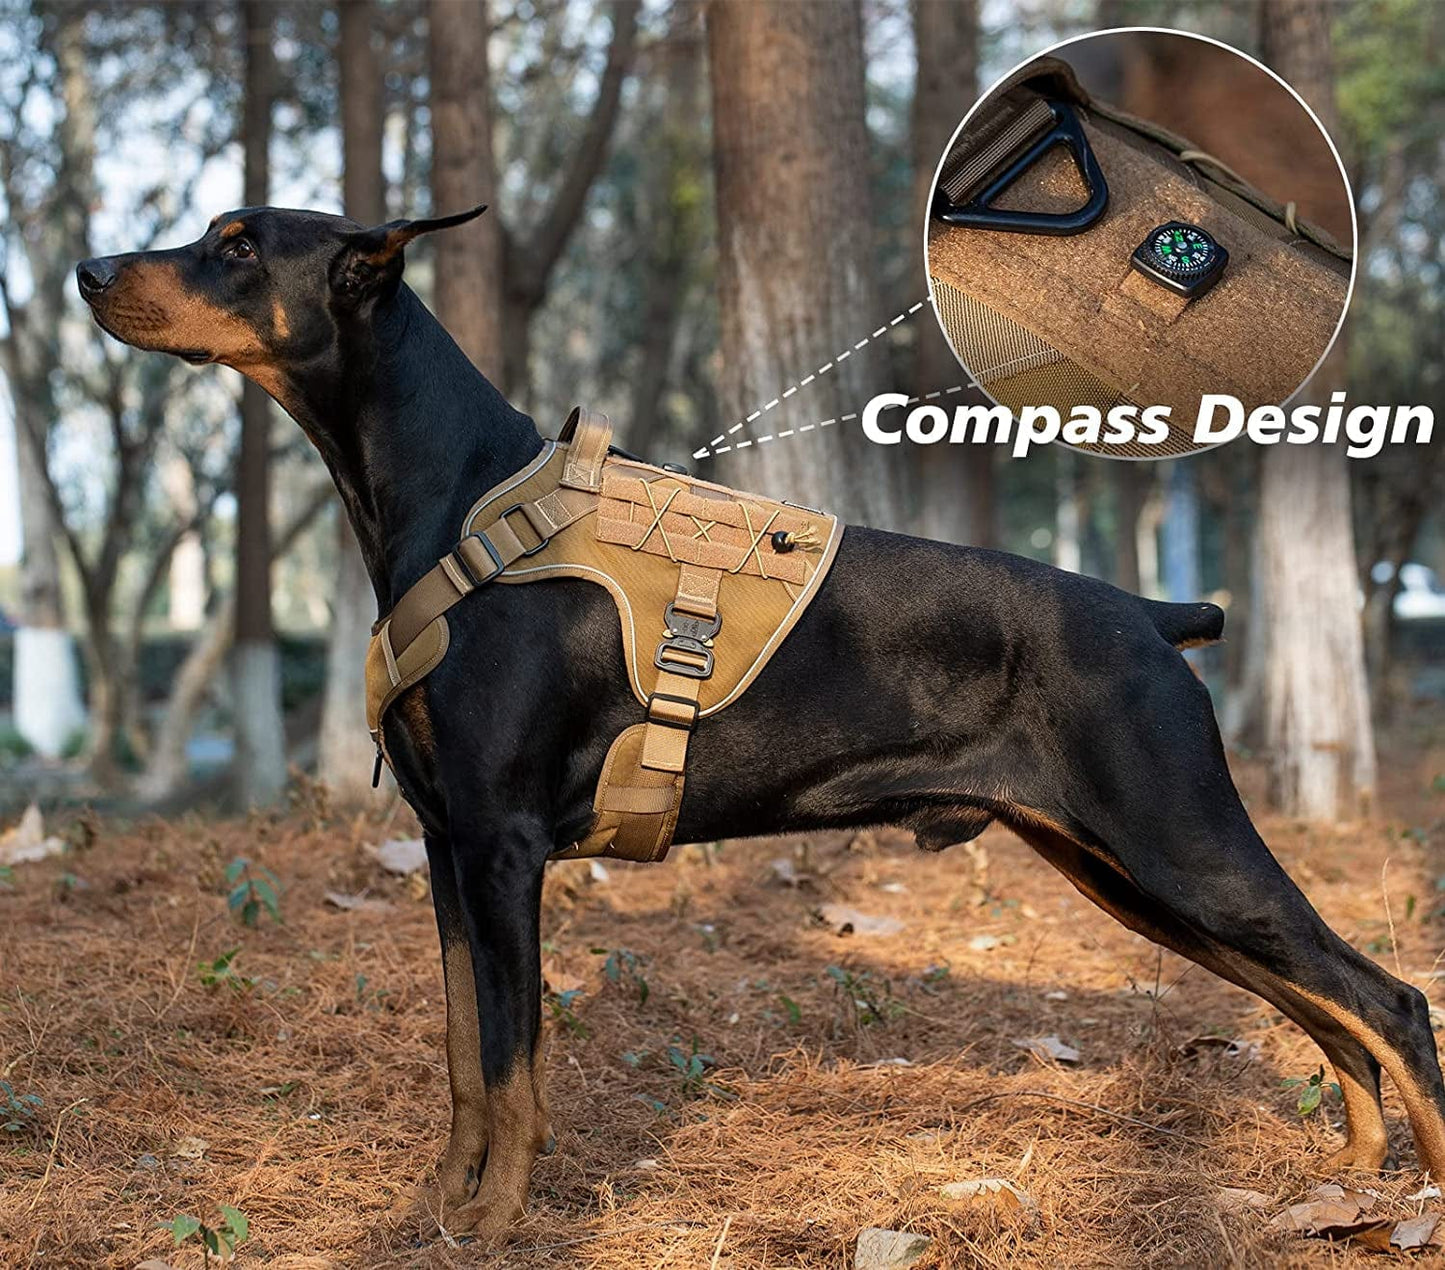 DNALLRINO Tactical Dog Harness for Large Medium Dogs, Heavy Duty Military Dog Harness with Handle, Adjustable No Pull Service Dog Harness with Molle & Loop Panels for Hiking Walking Training